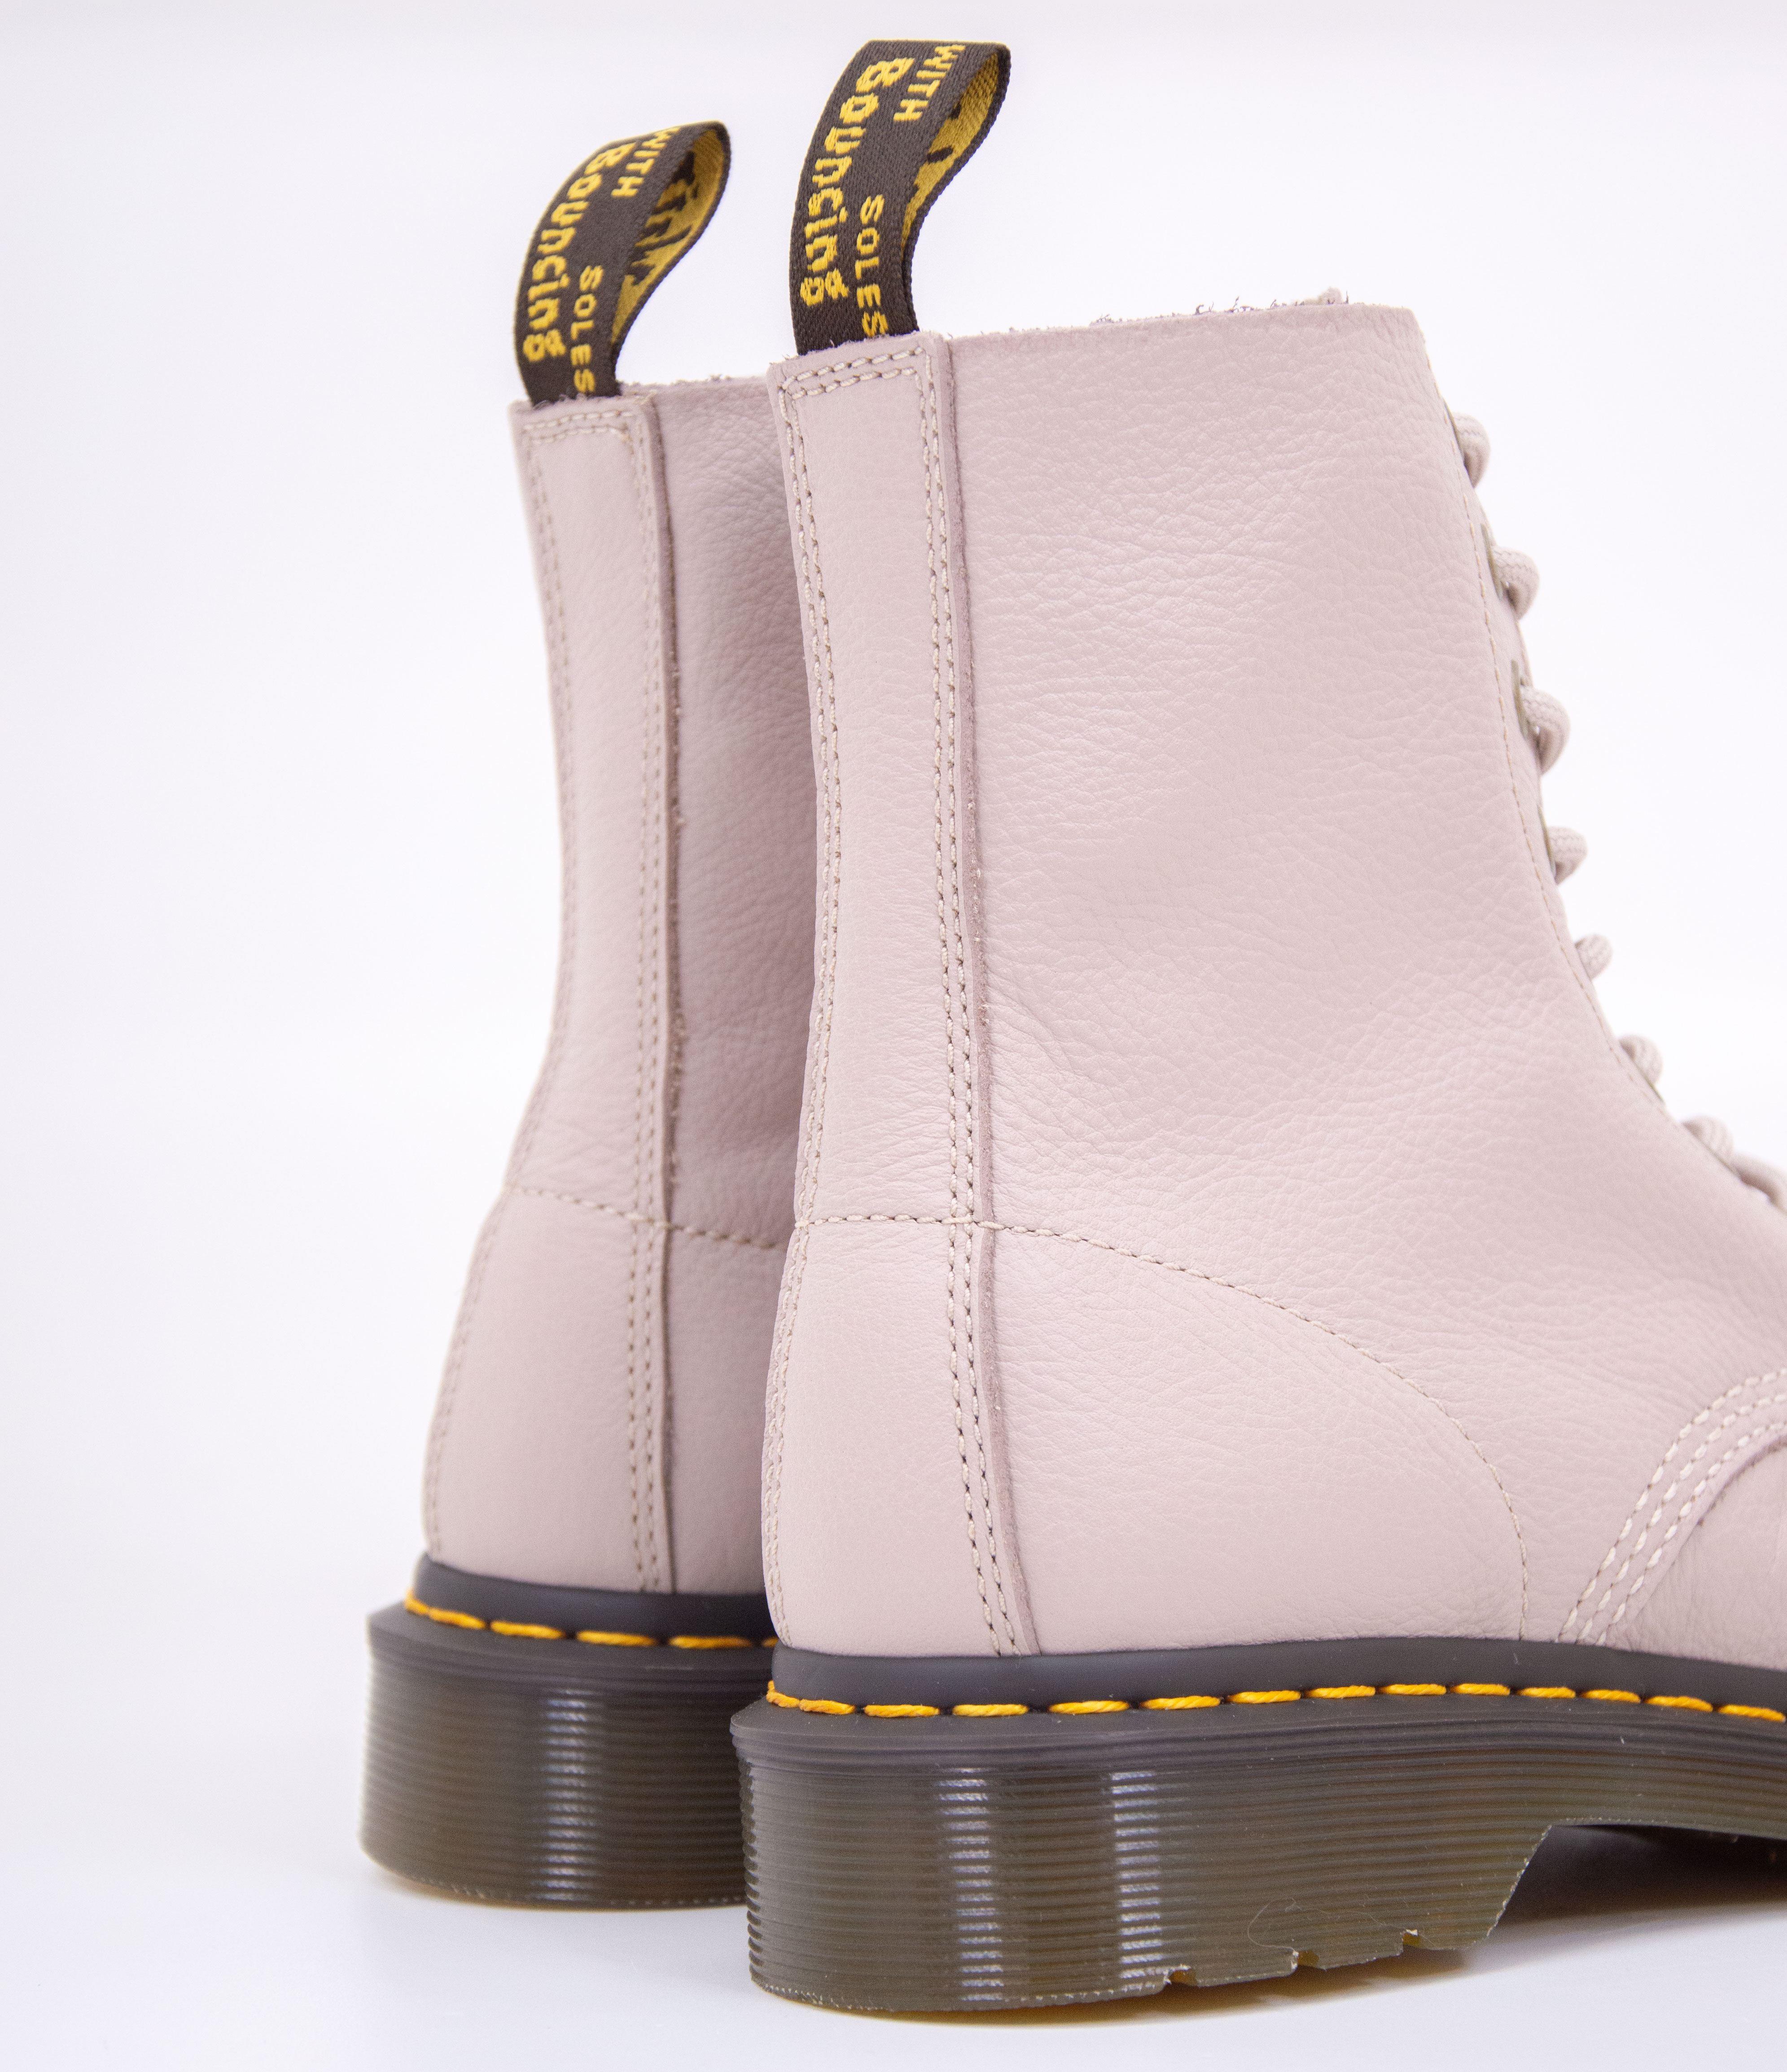 Dr. Martens - 1460 PASCAL - Vintage Taupe Virginia